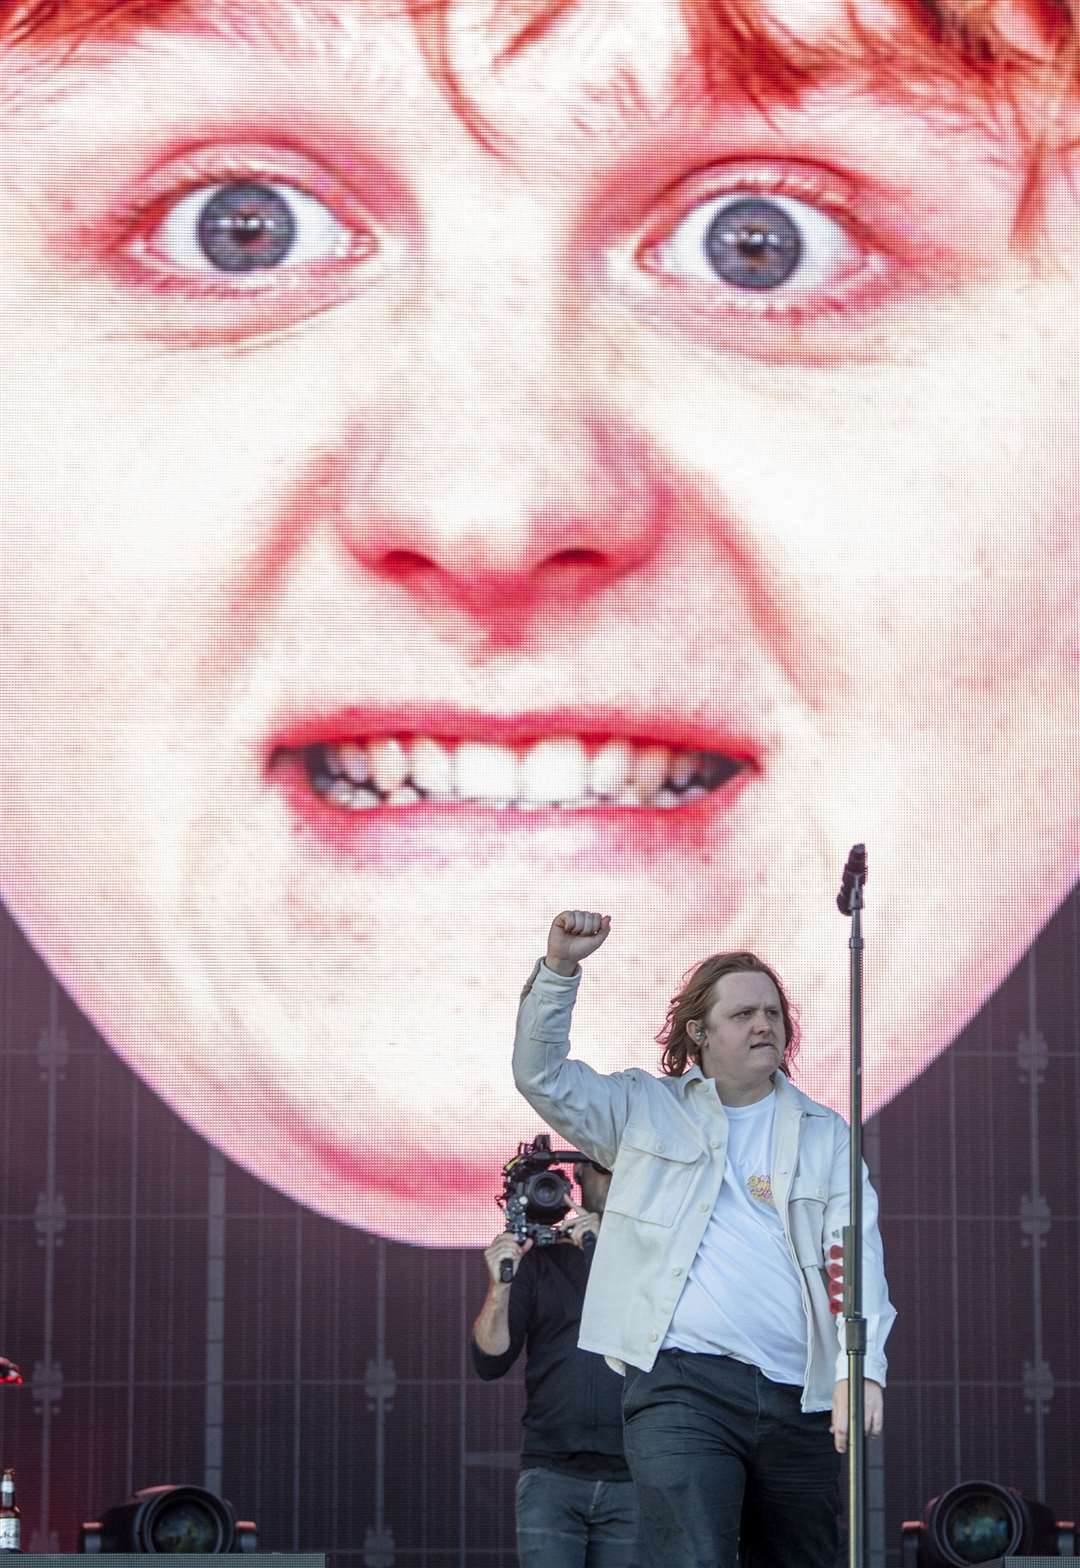 Lewis Capaldi performed beneath a giant image of his own face at the Trnsmt Festival in Glasgow in July (Lesley Martin/PA)